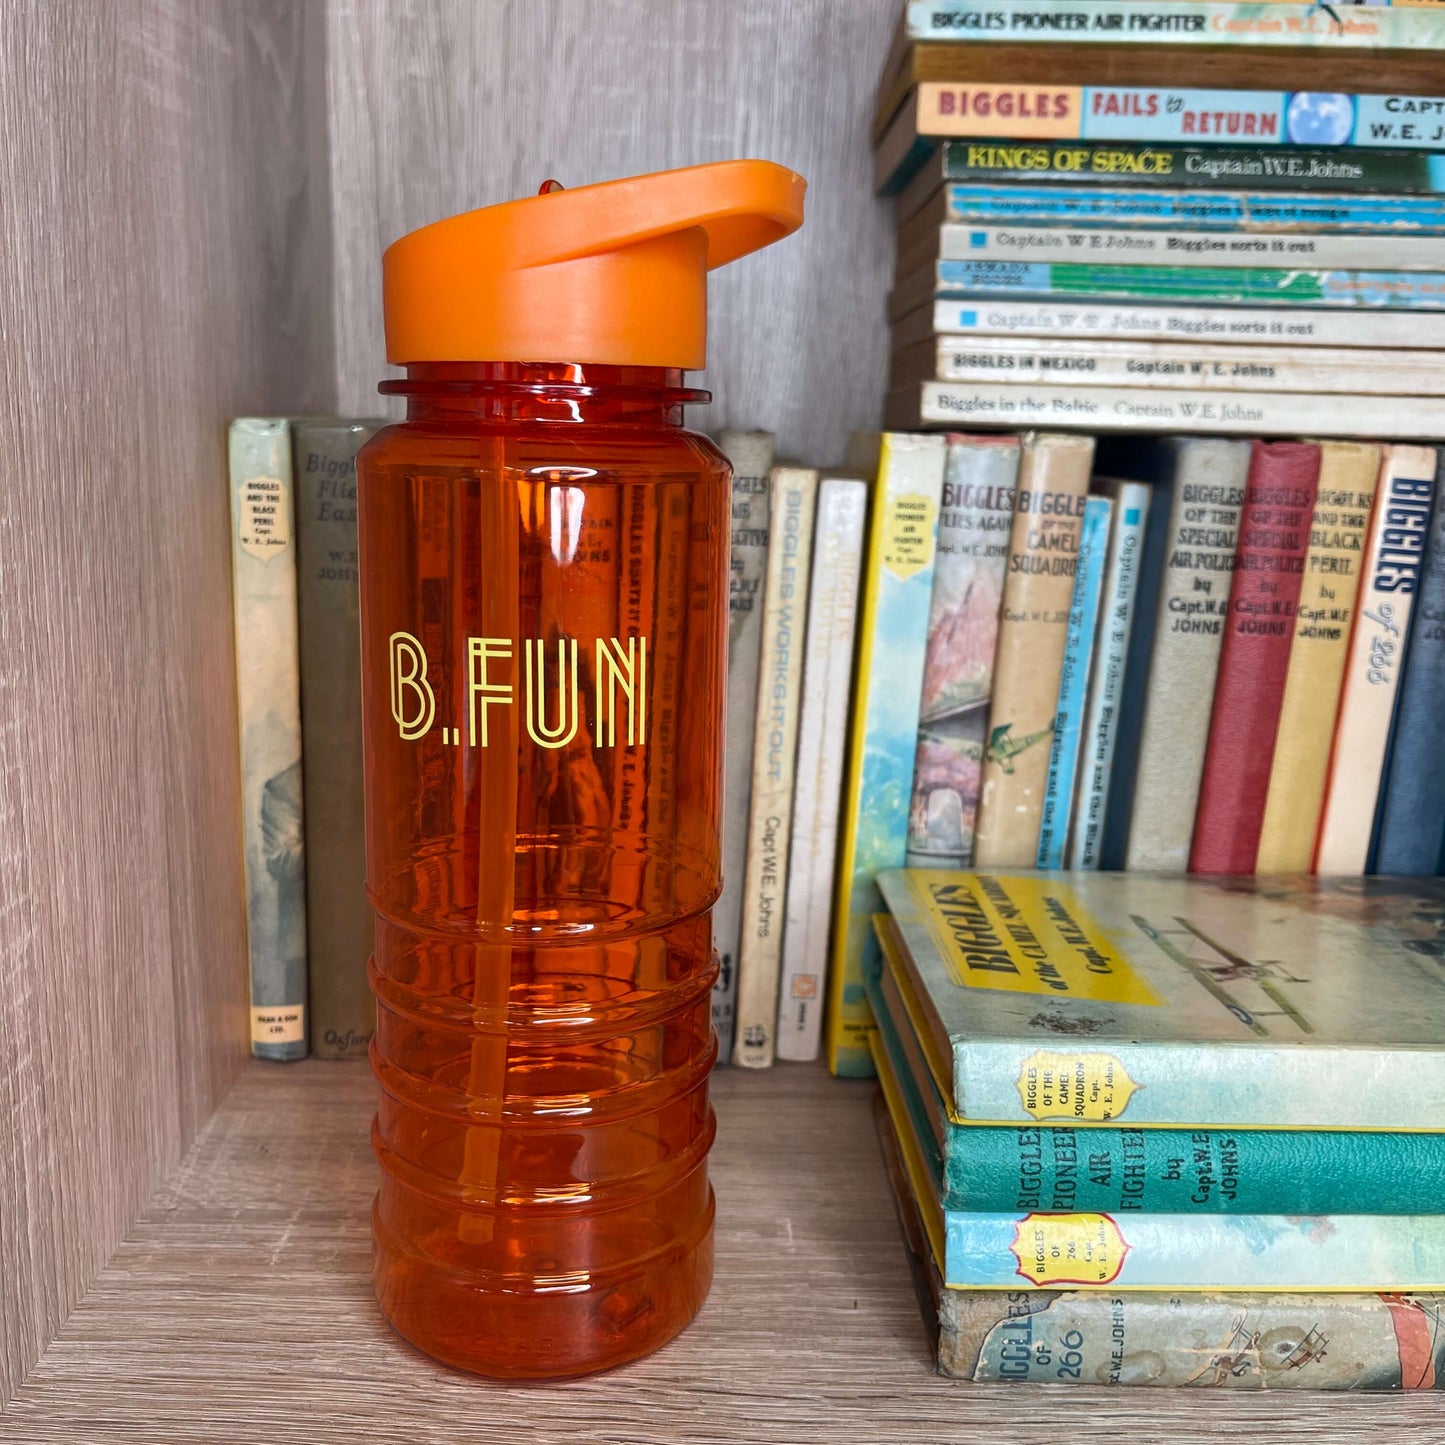 Bright orange plastic sports water bottle with B=Fun printed on it sitting on a book shelf next to vintage books.